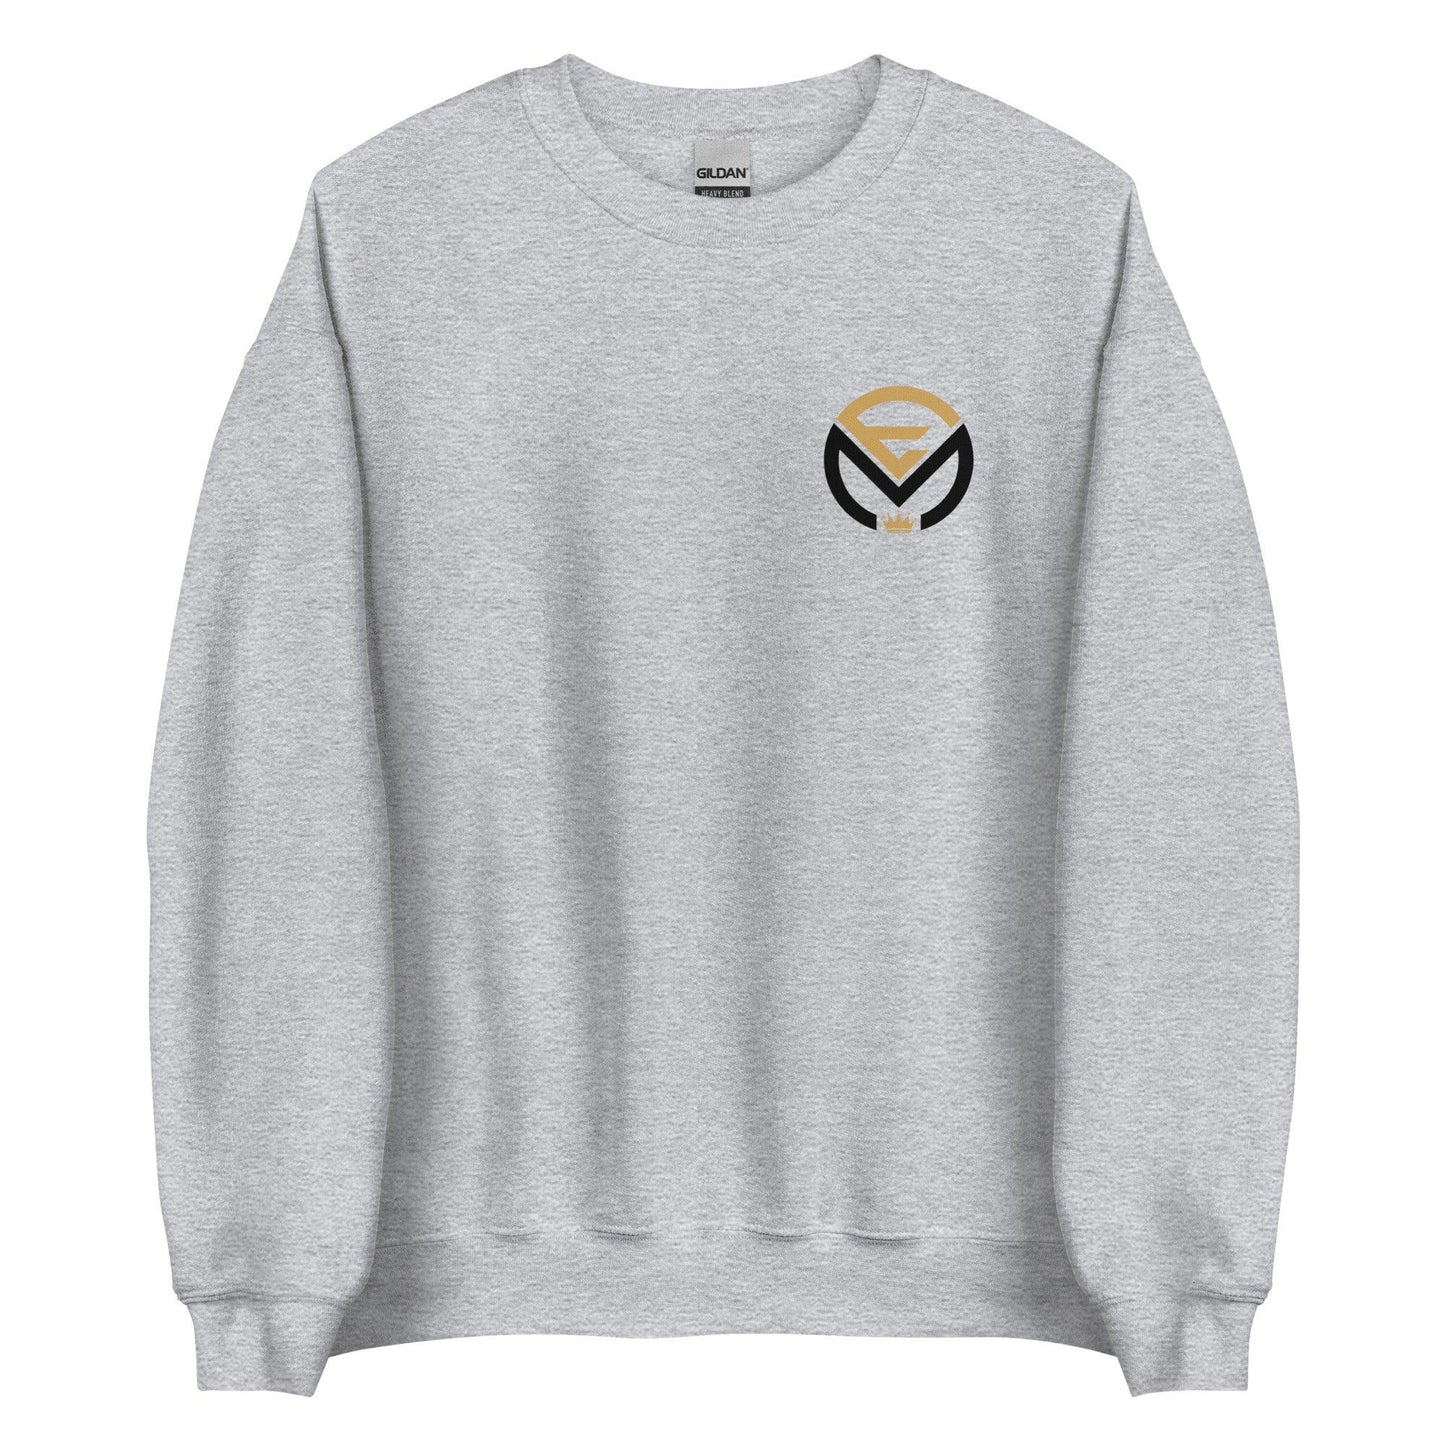 Sweatshirt produced with royalties white wool